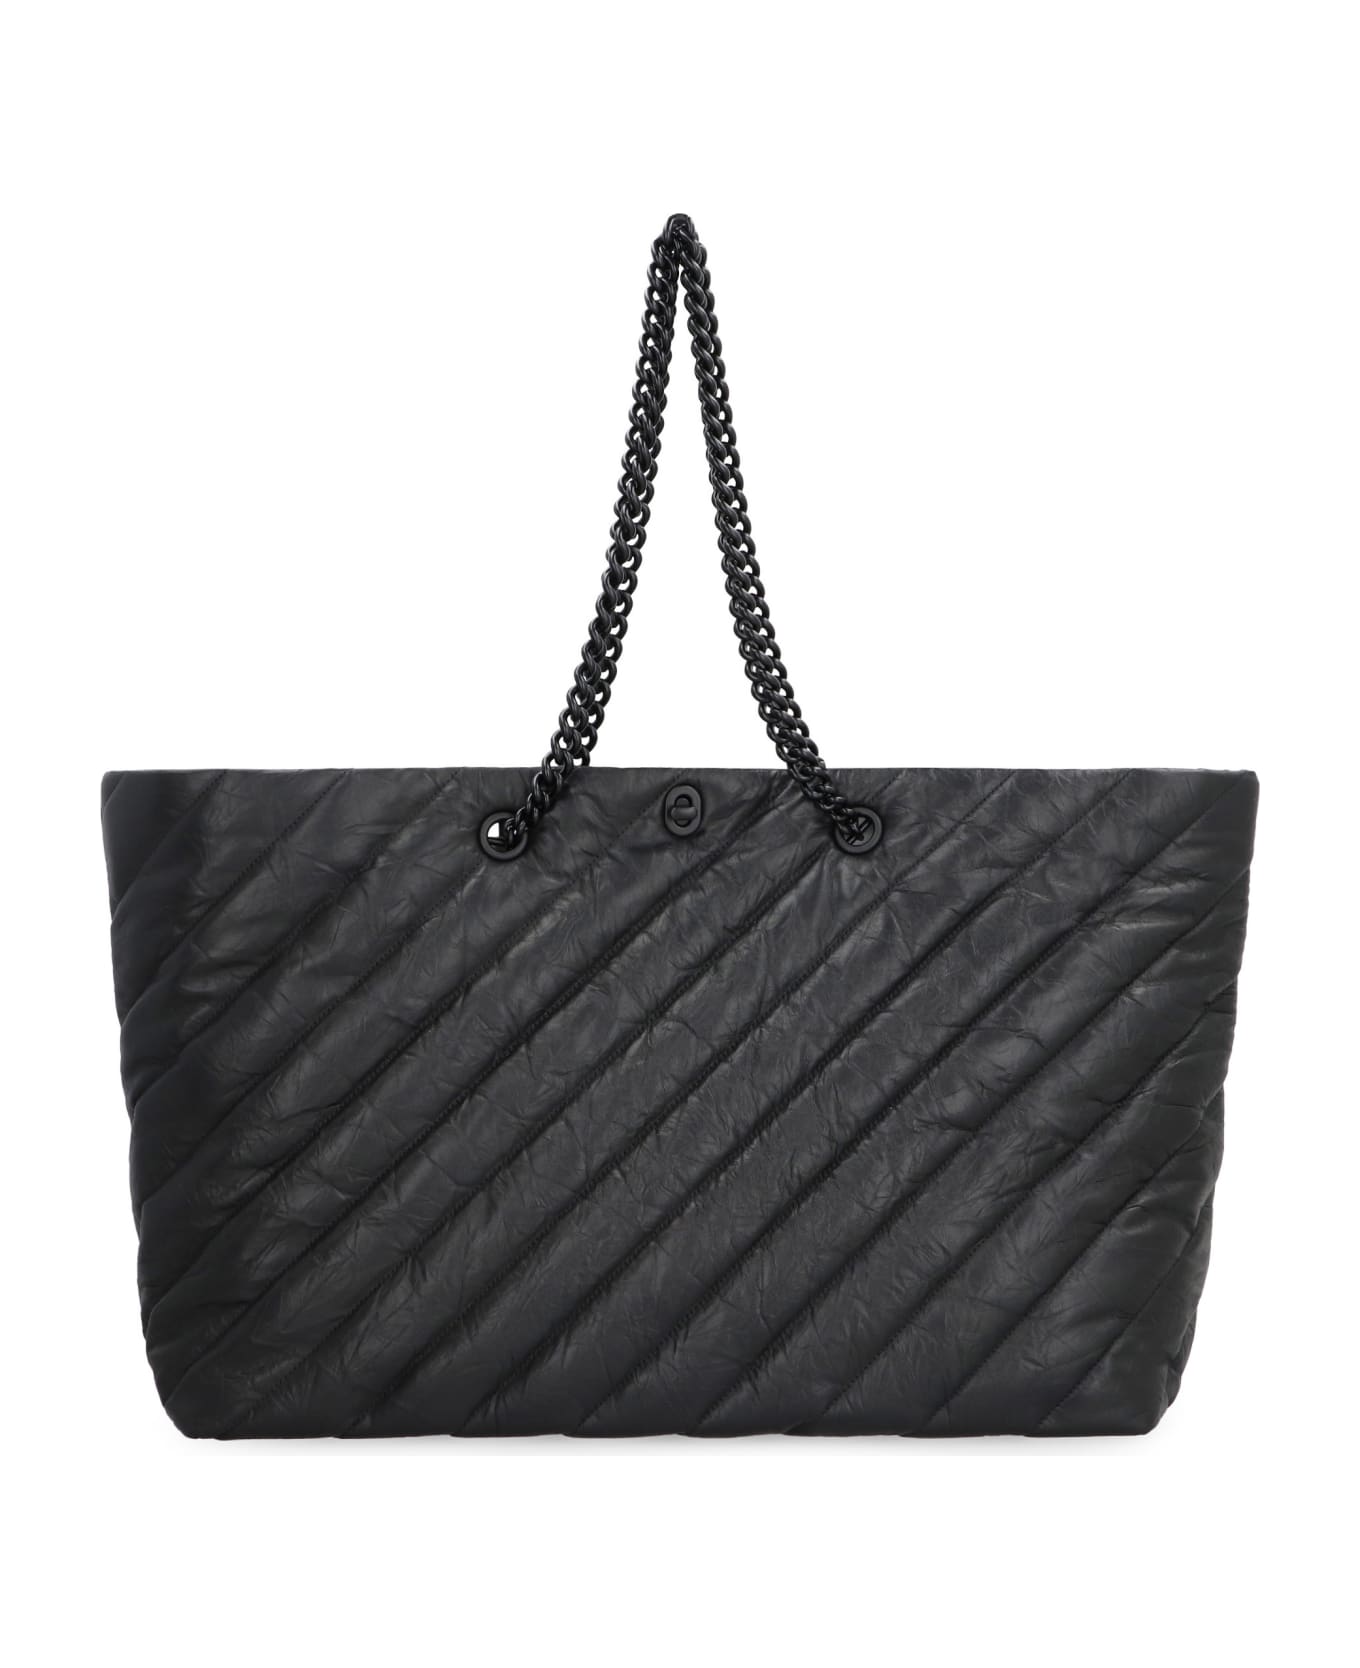 Balenciaga Carry All Crush Leather Tote - black トートバッグ